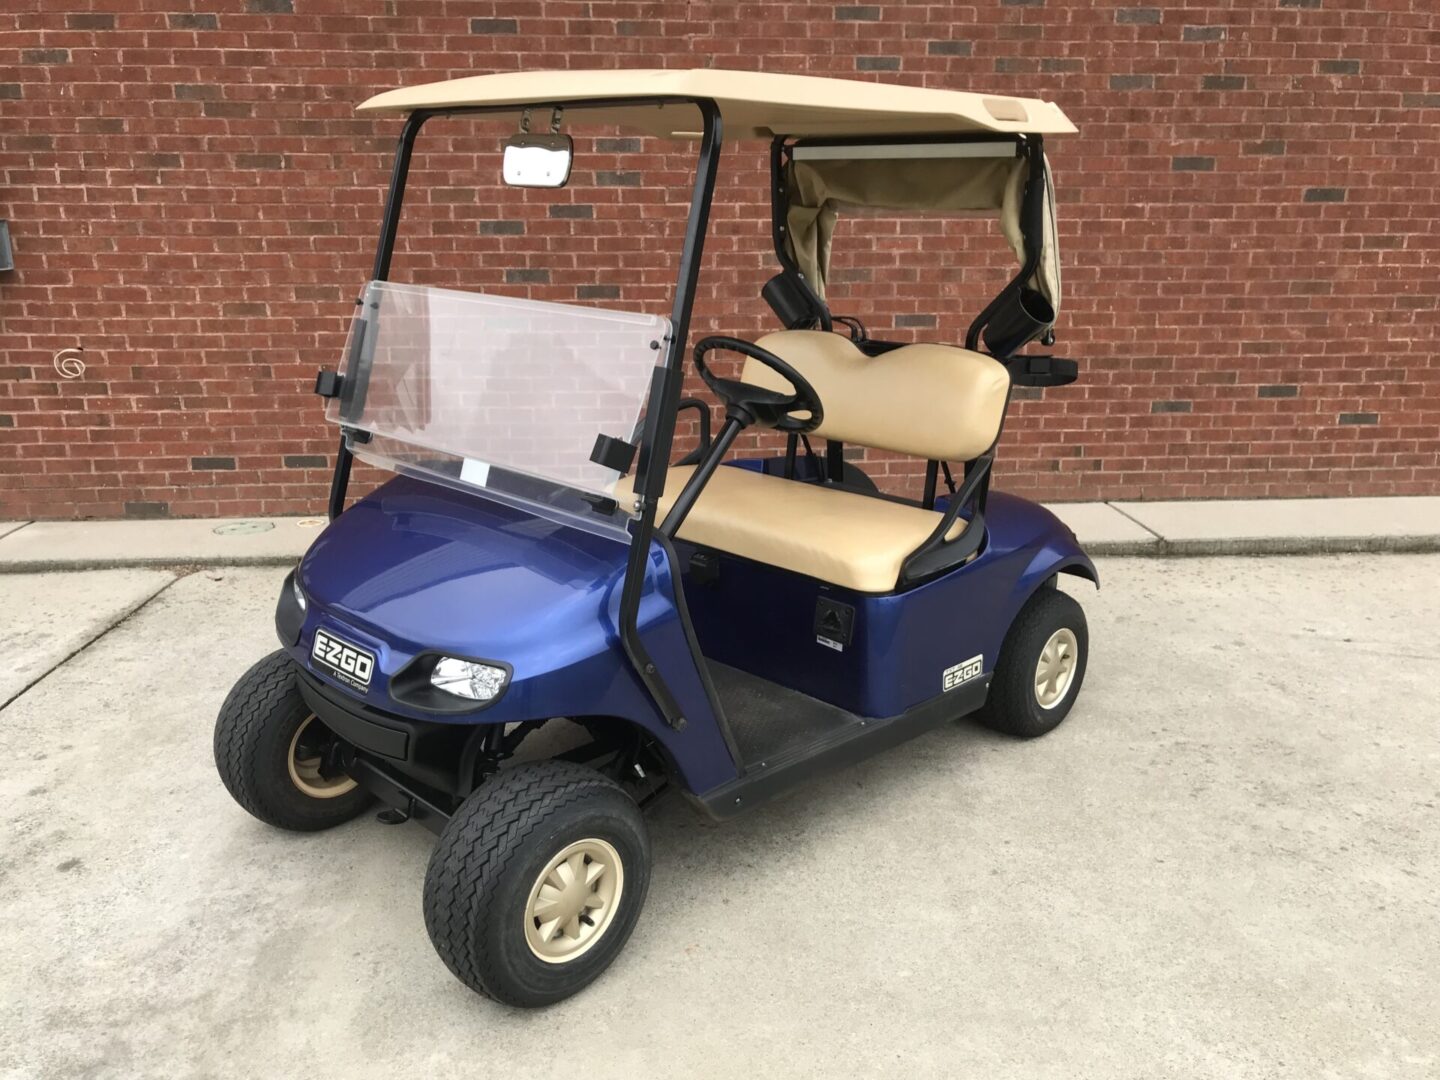 A blue golf cart with tan seats parked in front of a brick wall.